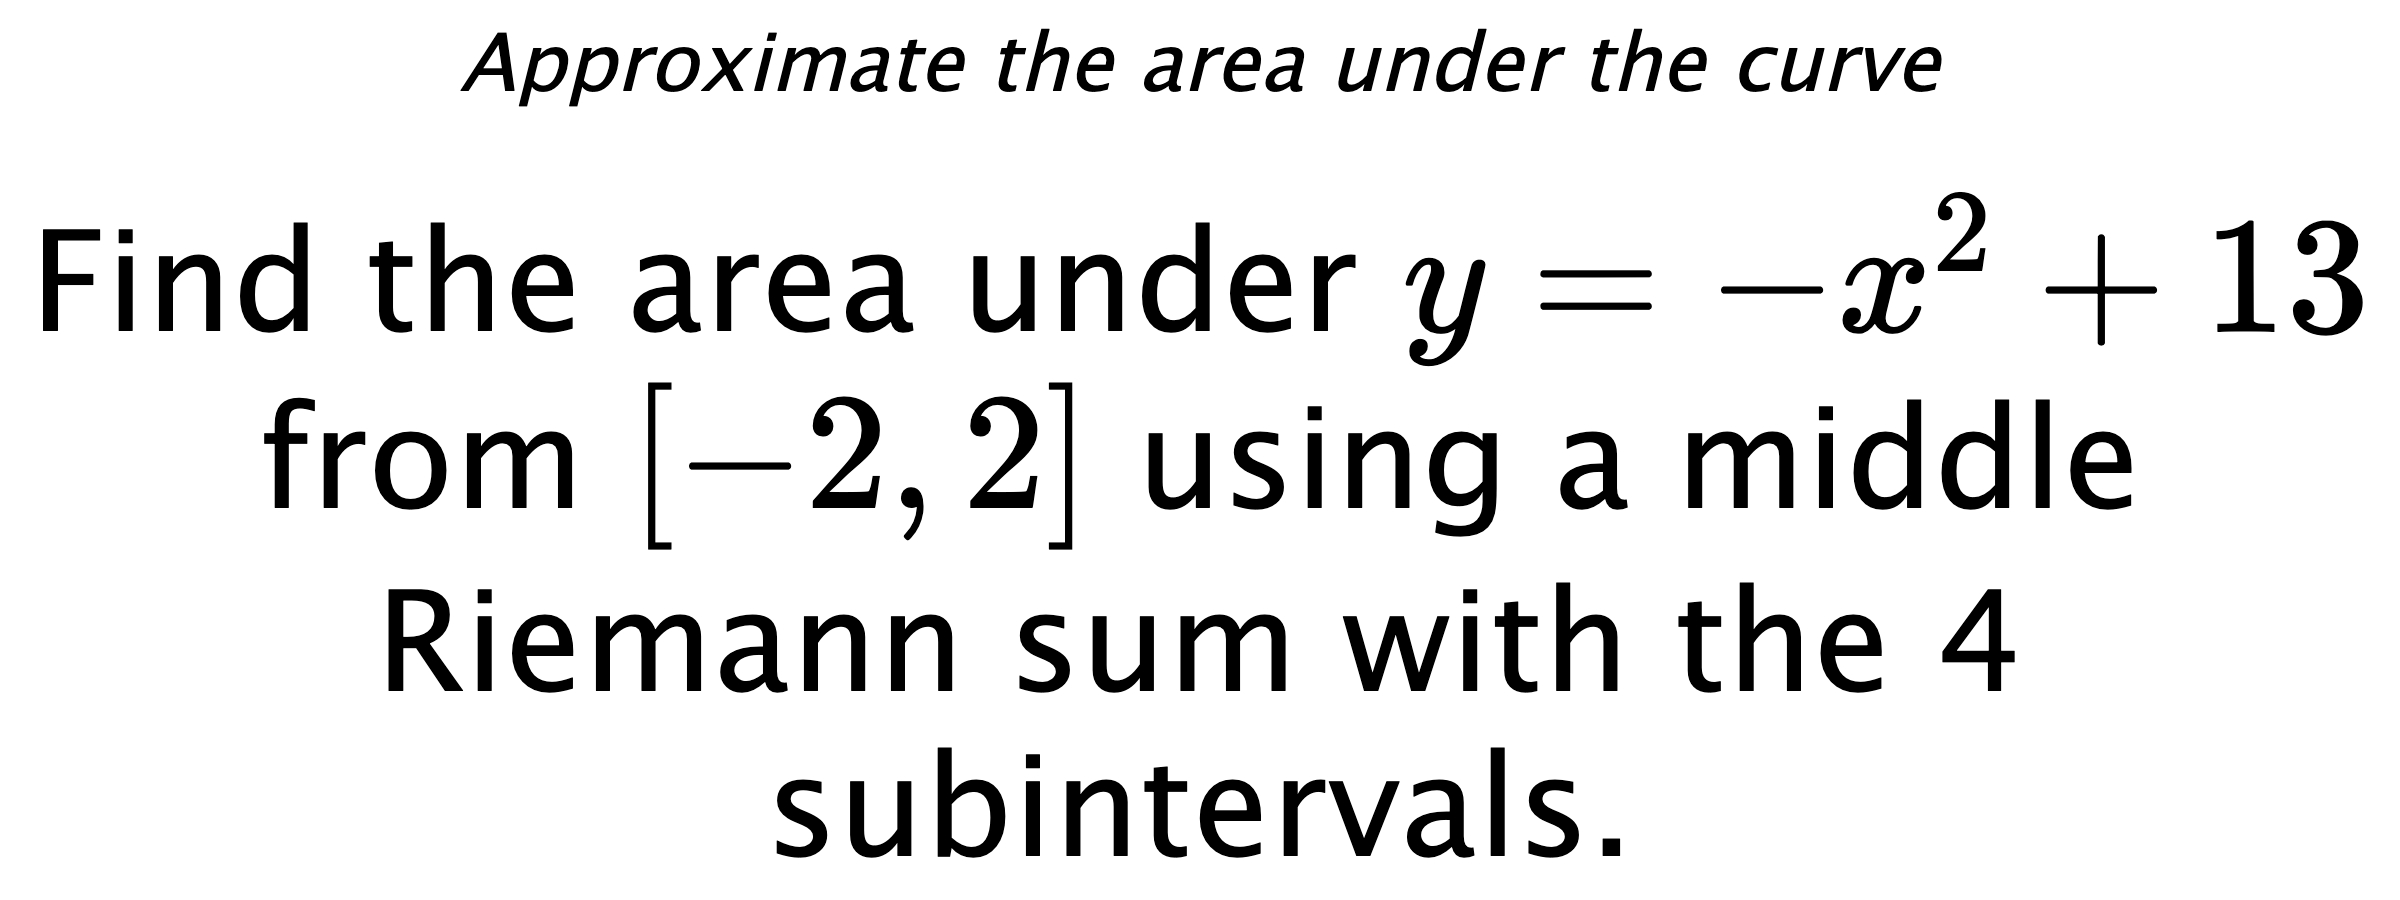 Approximate the area under the curve Find the area under $ y=-x^2+13 $ from $ [-2,2] $ using a middle Riemann sum with the 4 subintervals.